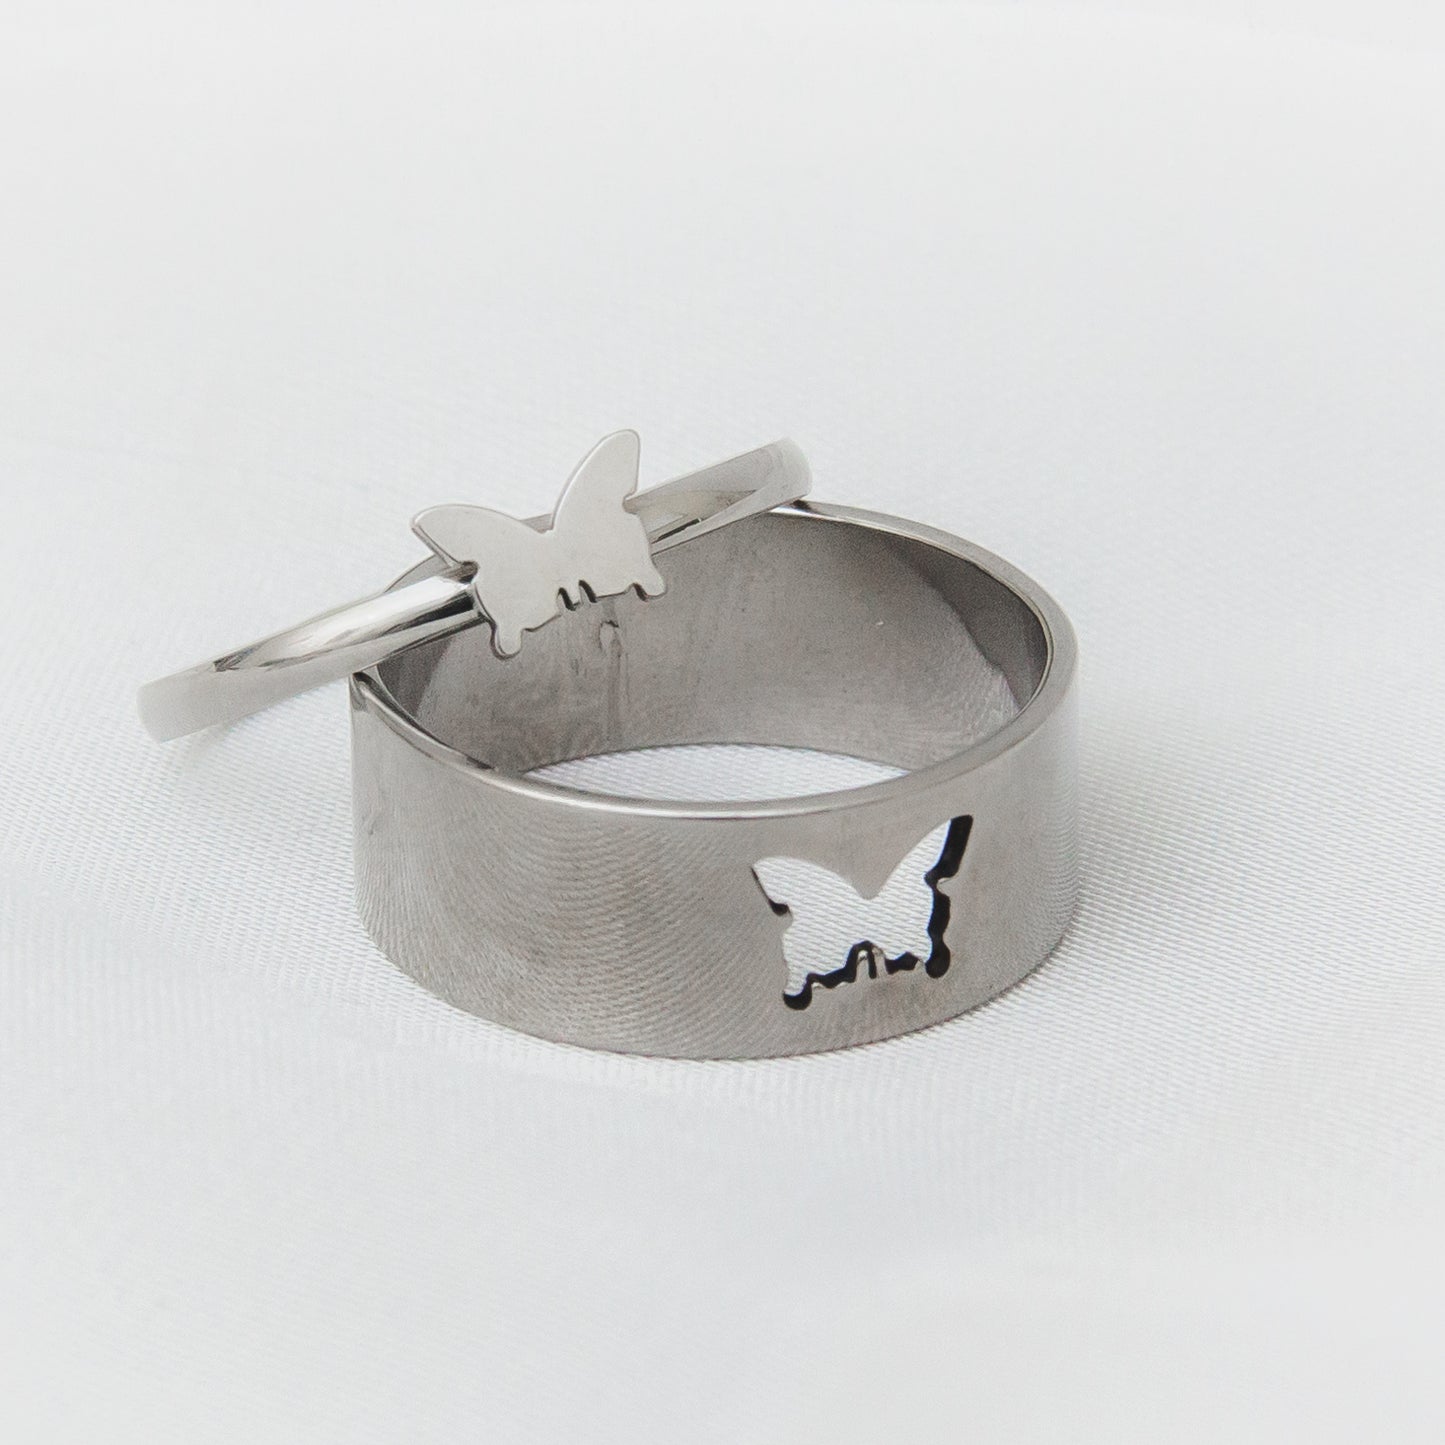 Butterfly Couple Rings - Silver